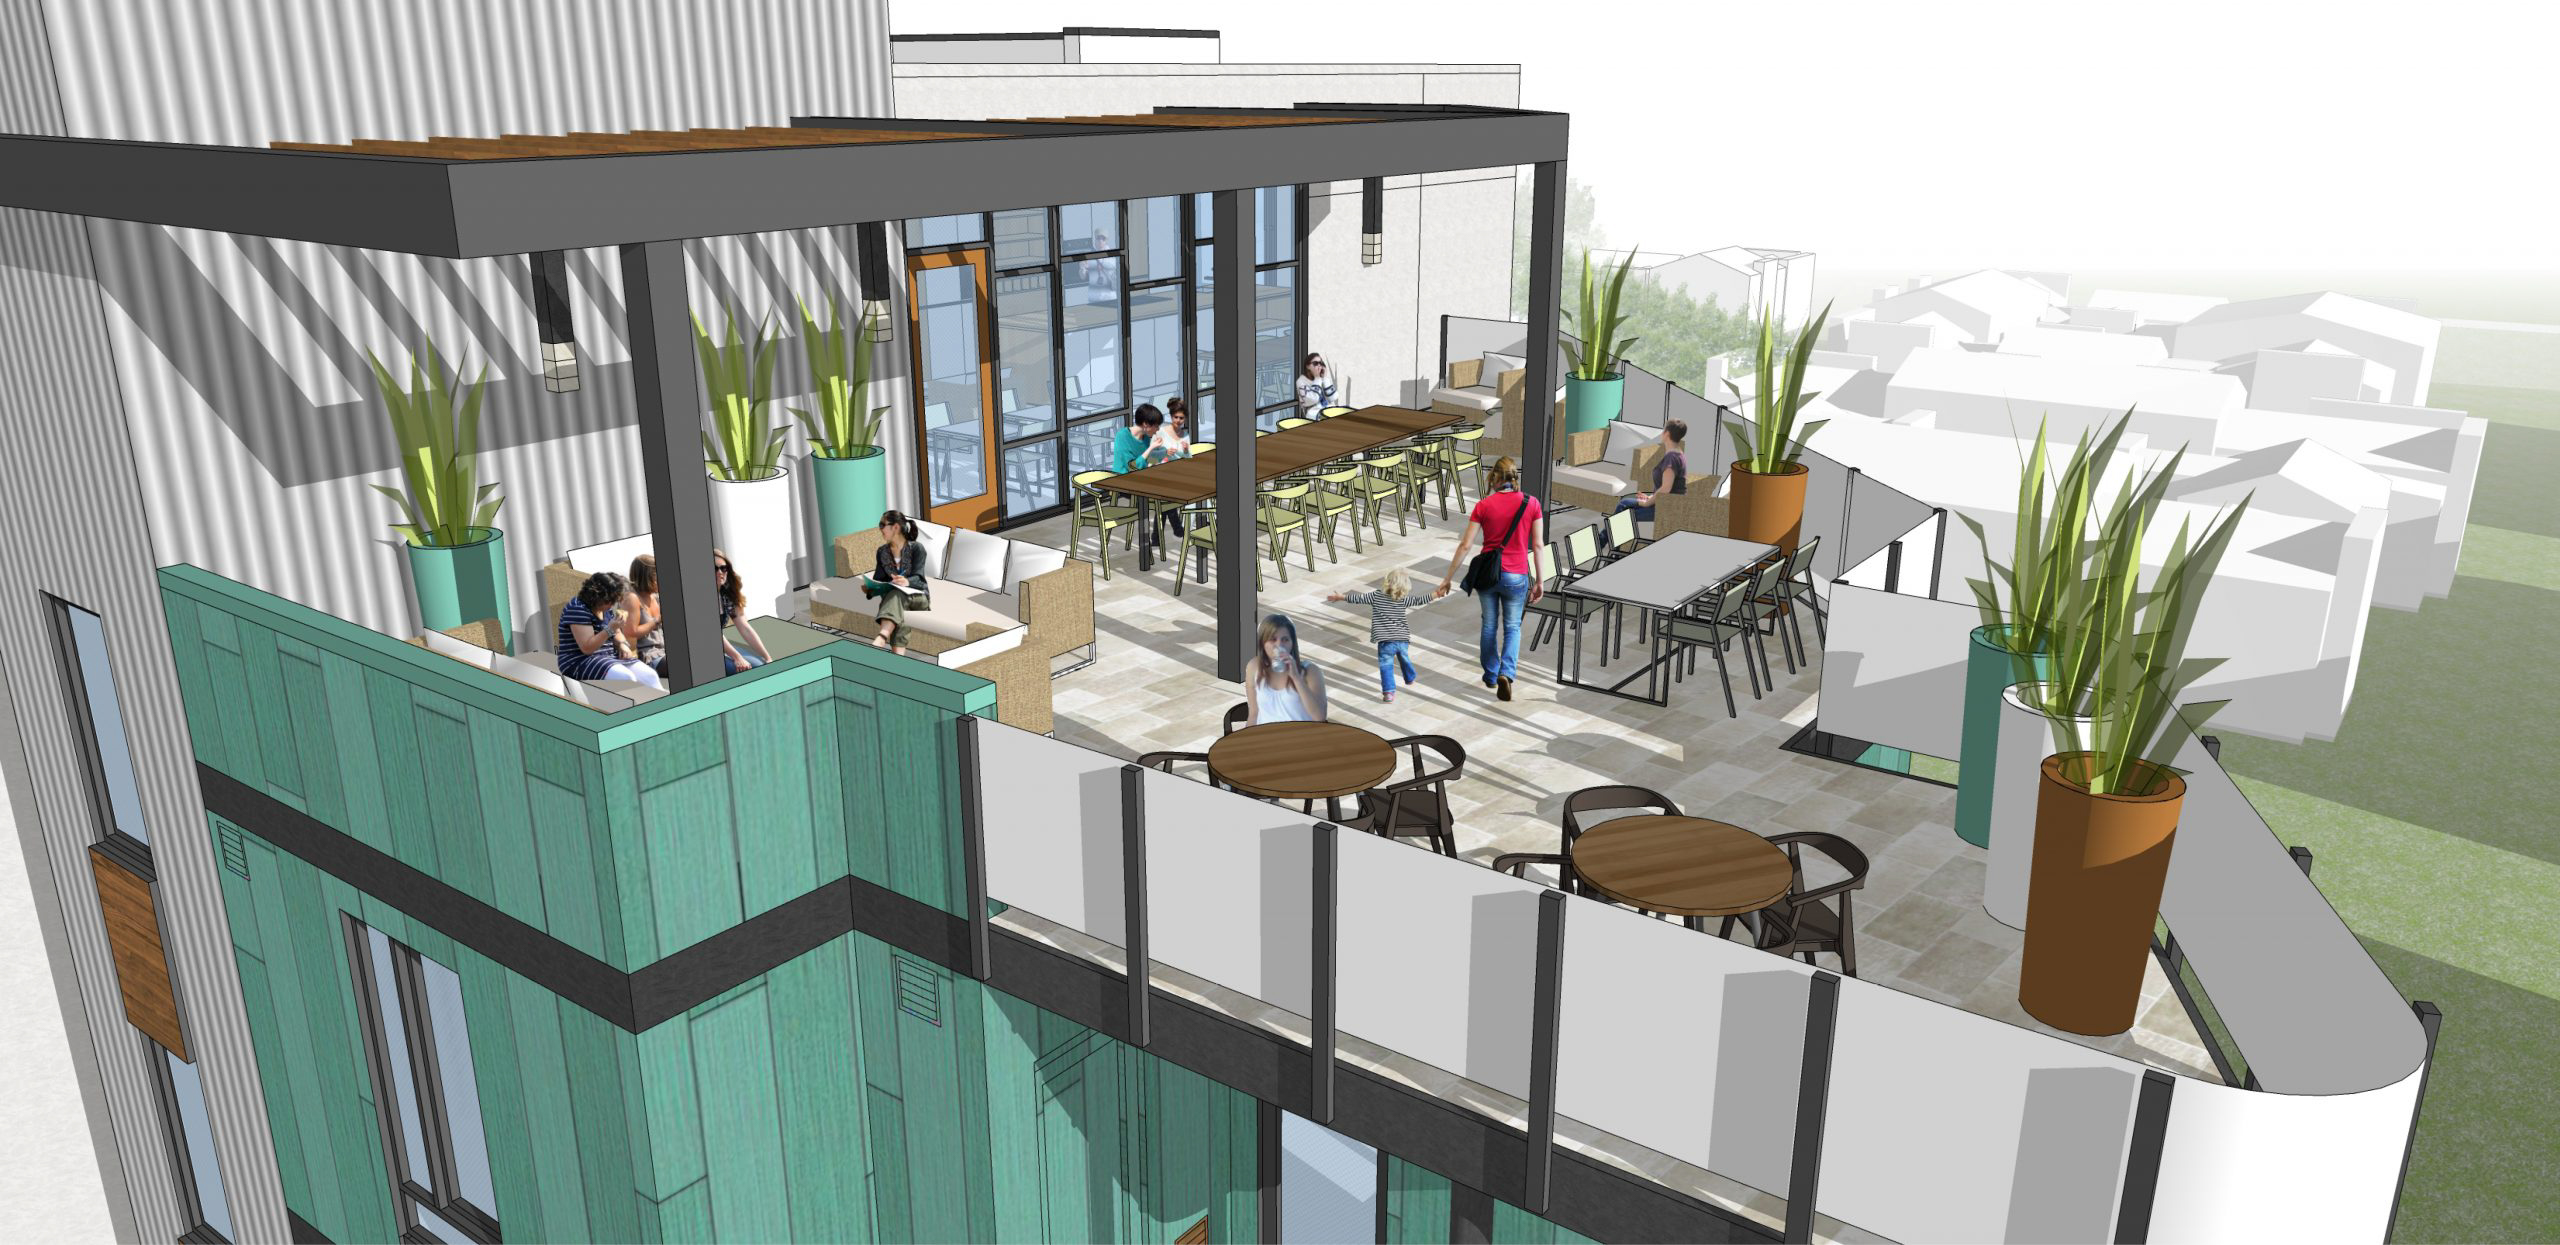 750 West San Carlos roof deck view, rendering via SGPA Architecture and Planning